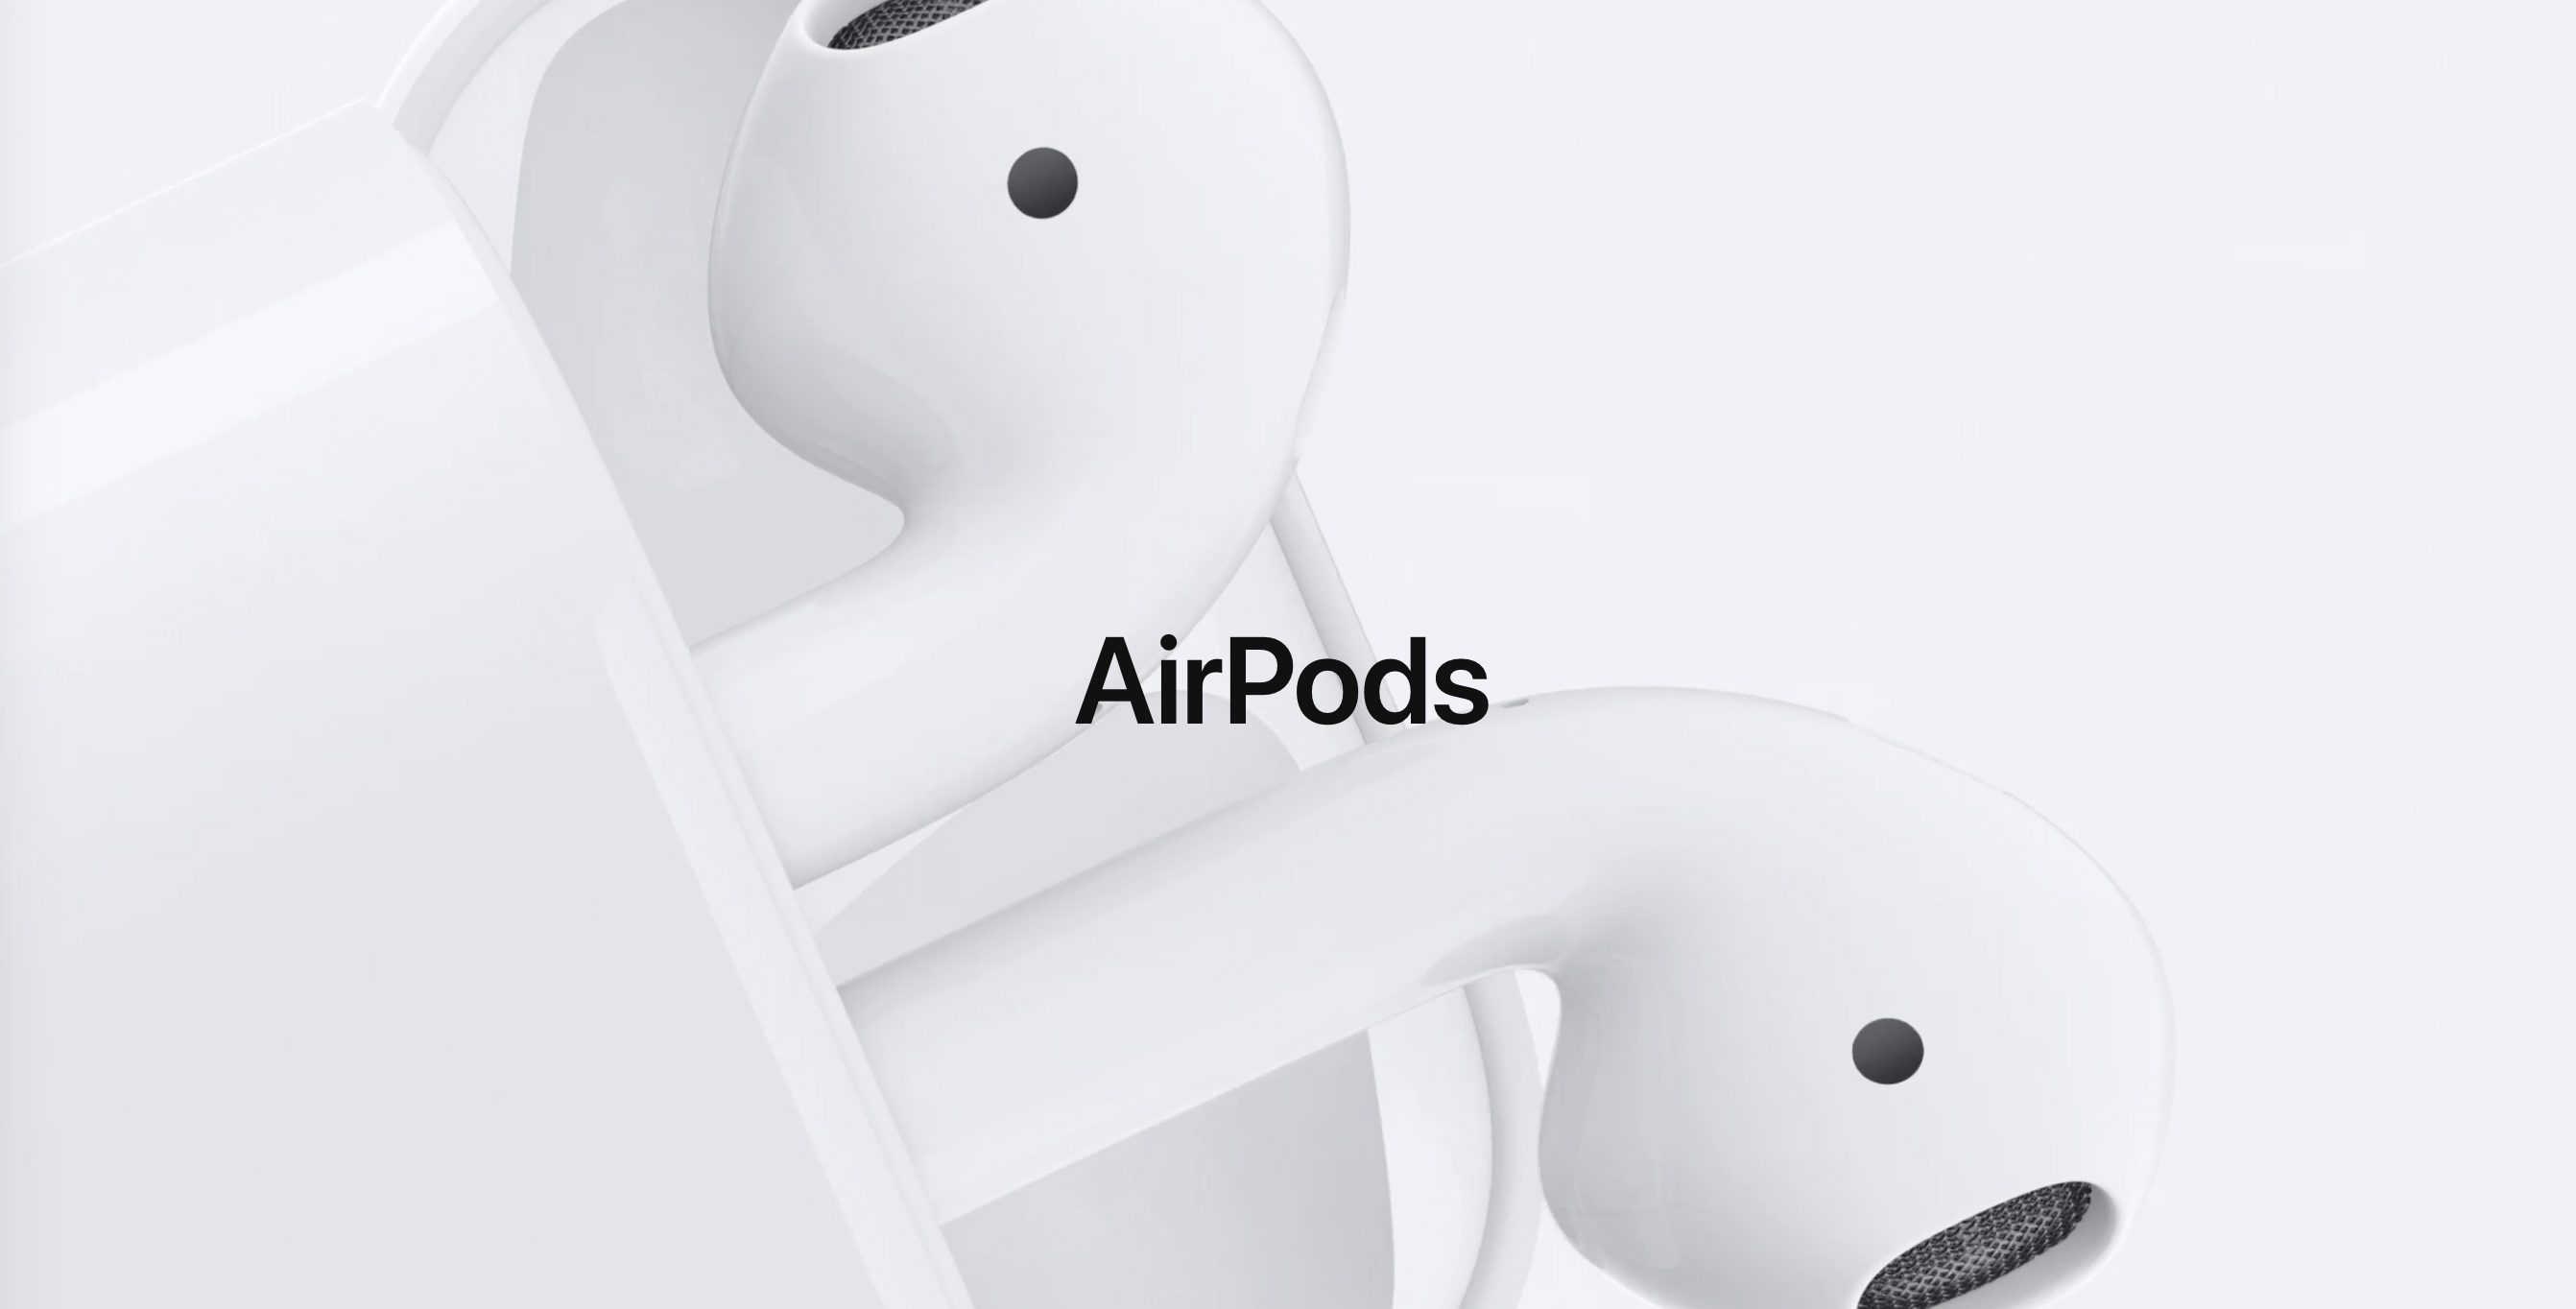 Caius aim Australian person Digitimes: AirPods 2 launching in first half of this year, redesigned to  support 'health monitoring' features - 9to5Mac